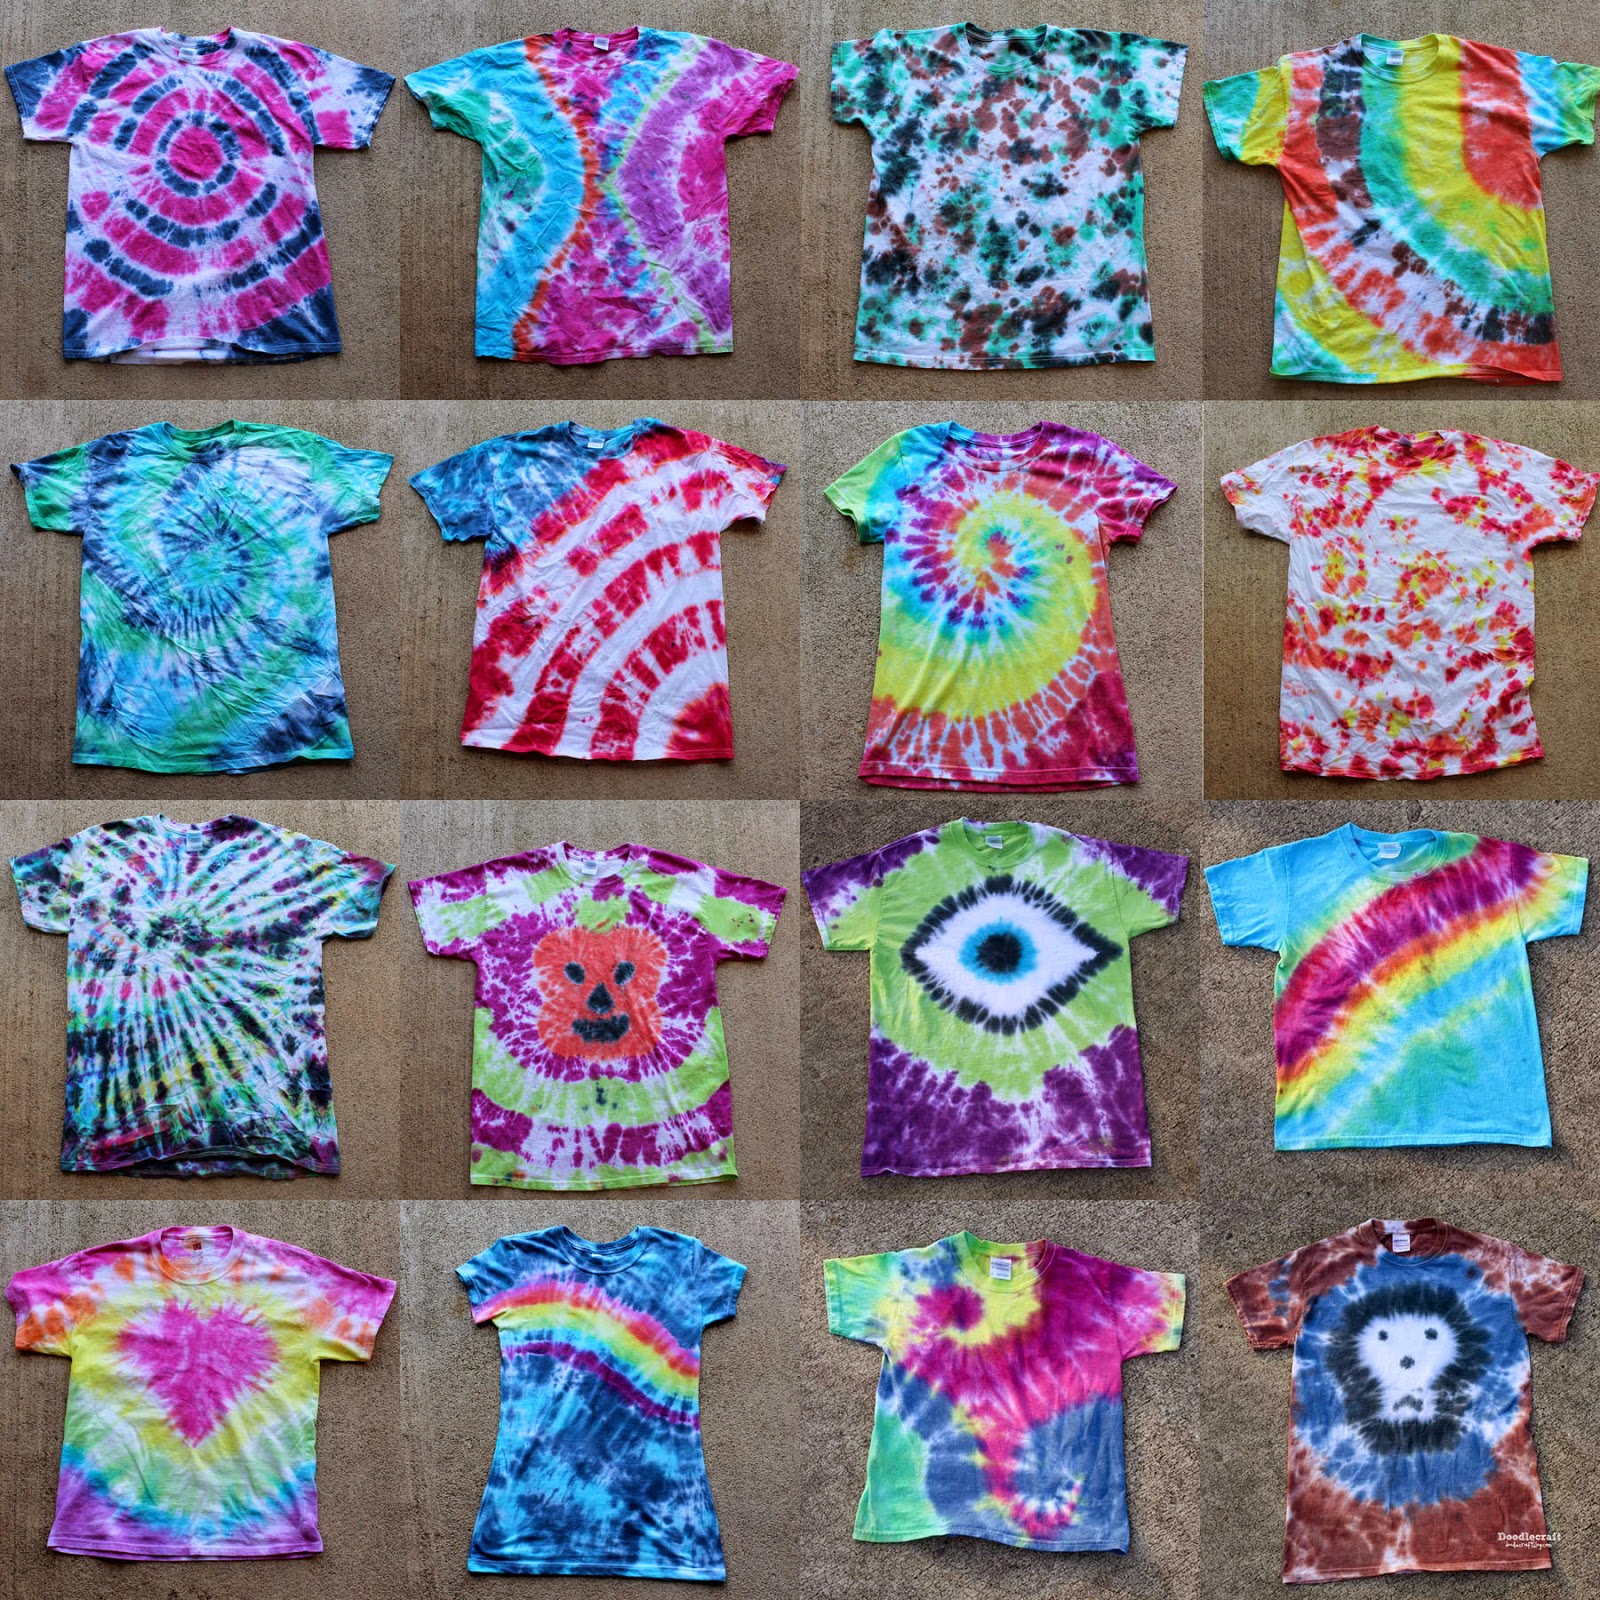 16 awesome tie dye shirts patterns easy diy – Matheson Memorial Library